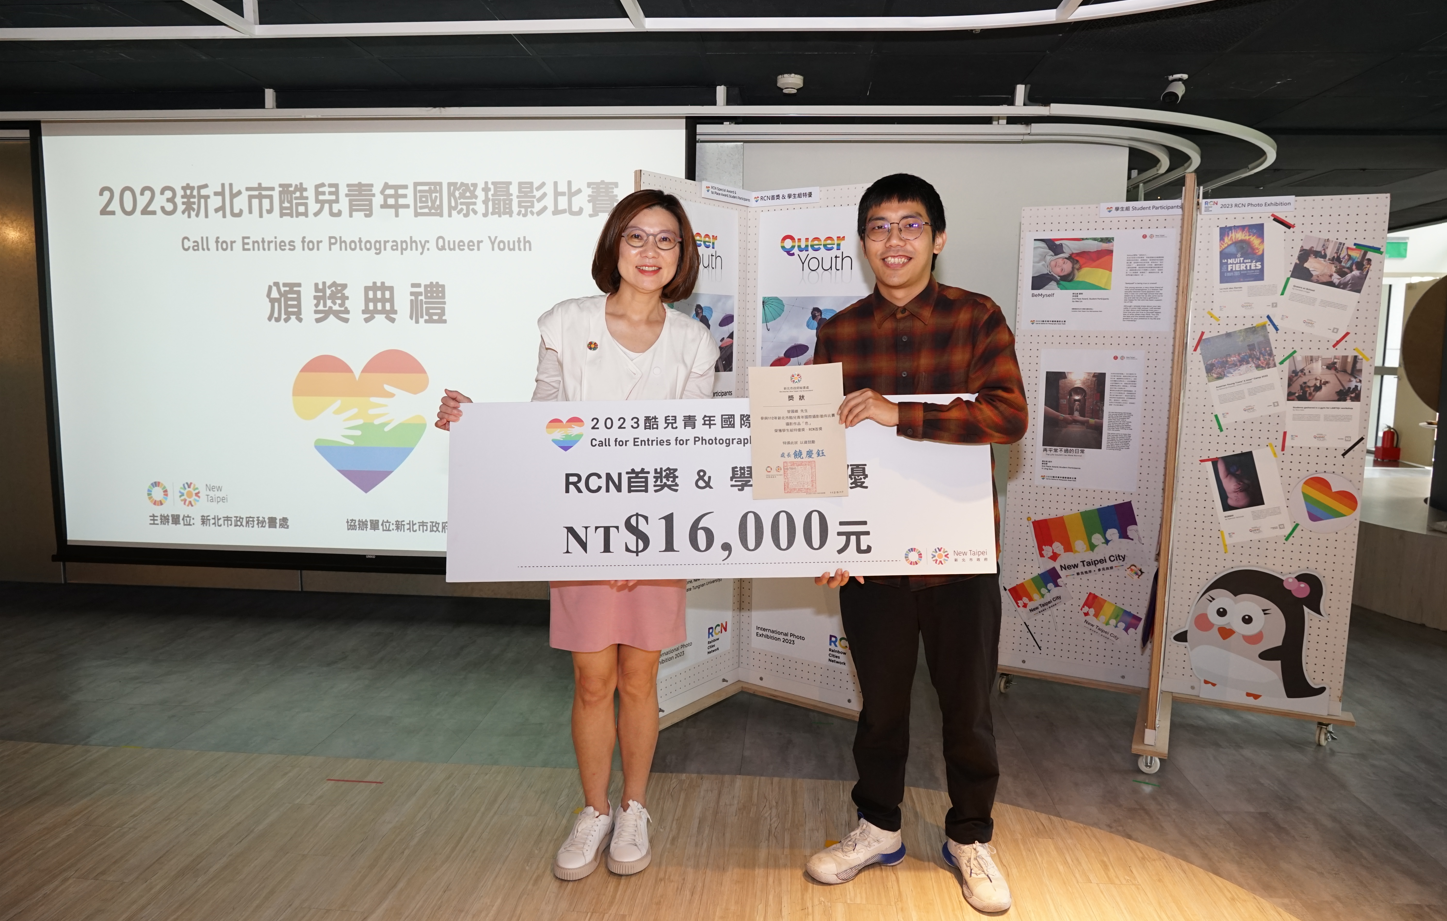 Student category winning entry “True Colors” represents New Taipei City in the RCN IDAHOBIT photo exhibit, concomitant physical and online displays